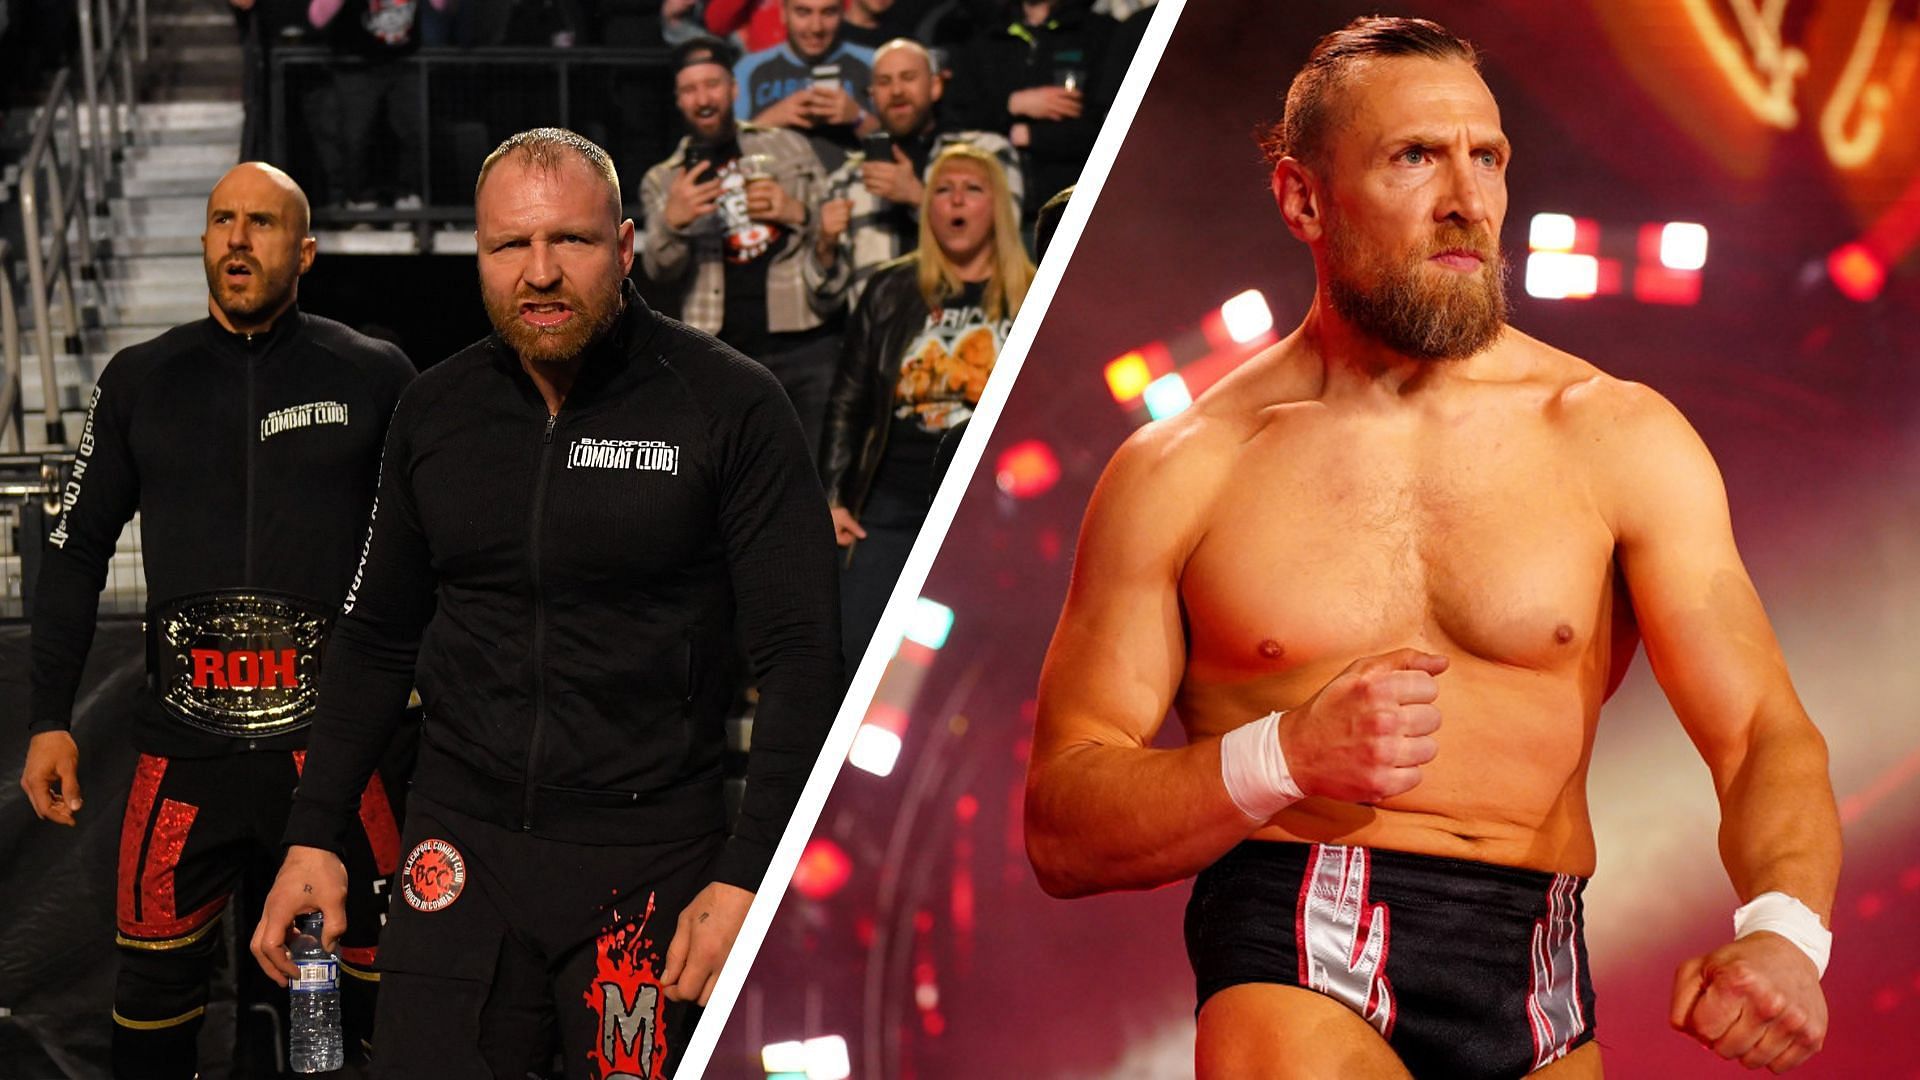 Bryan Danielson and Jon Moxley founded The Blackpool Combat Club alongside William Regal